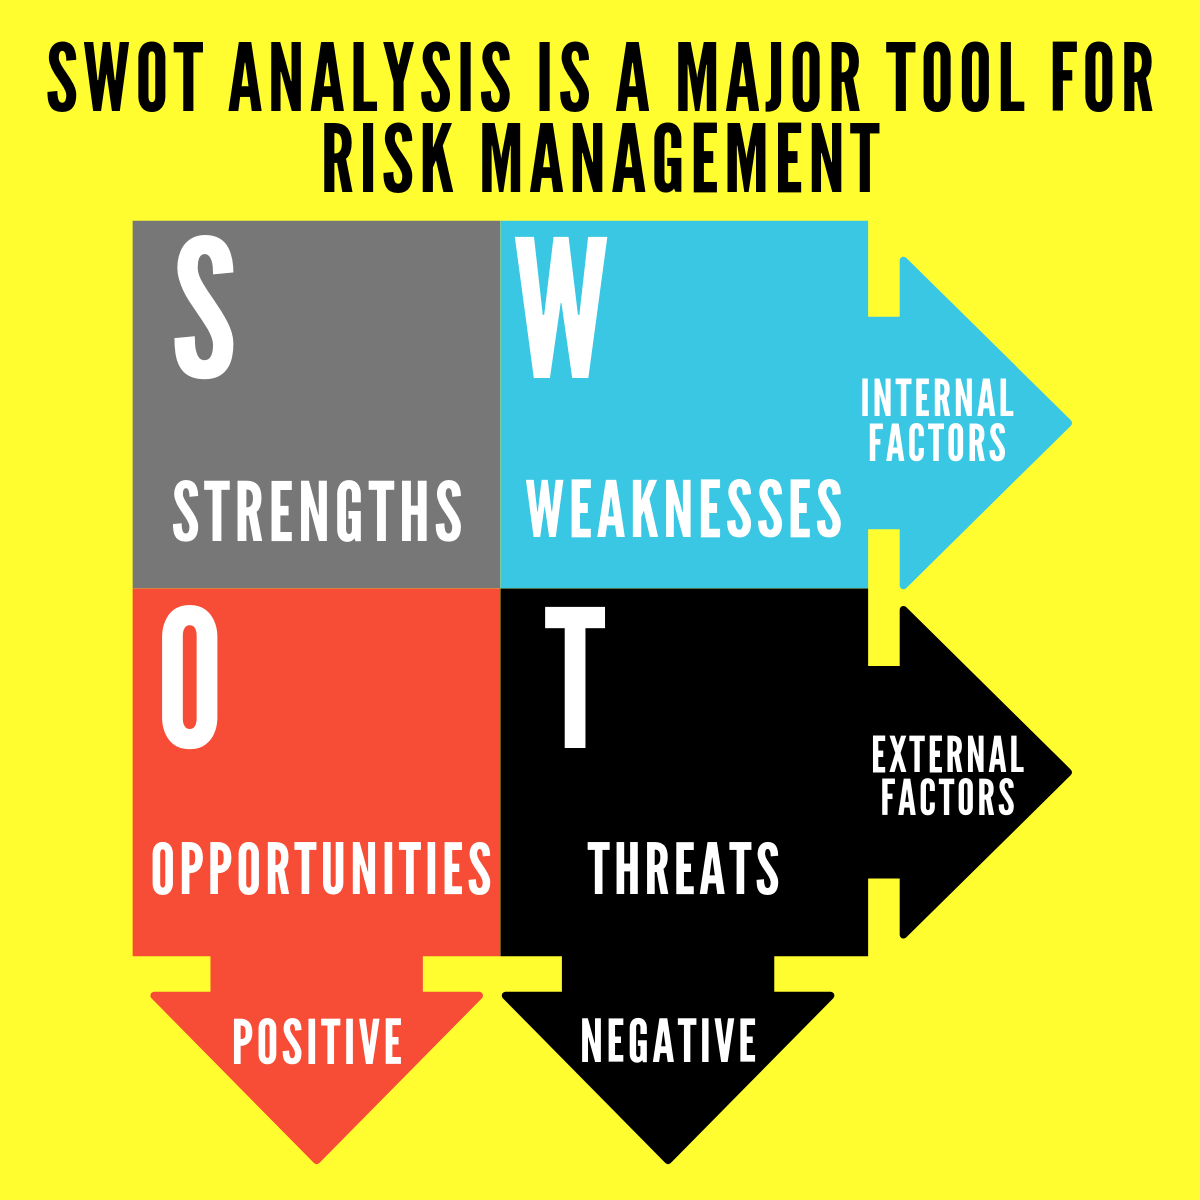 SWOT Analysis is a major tool for risk management